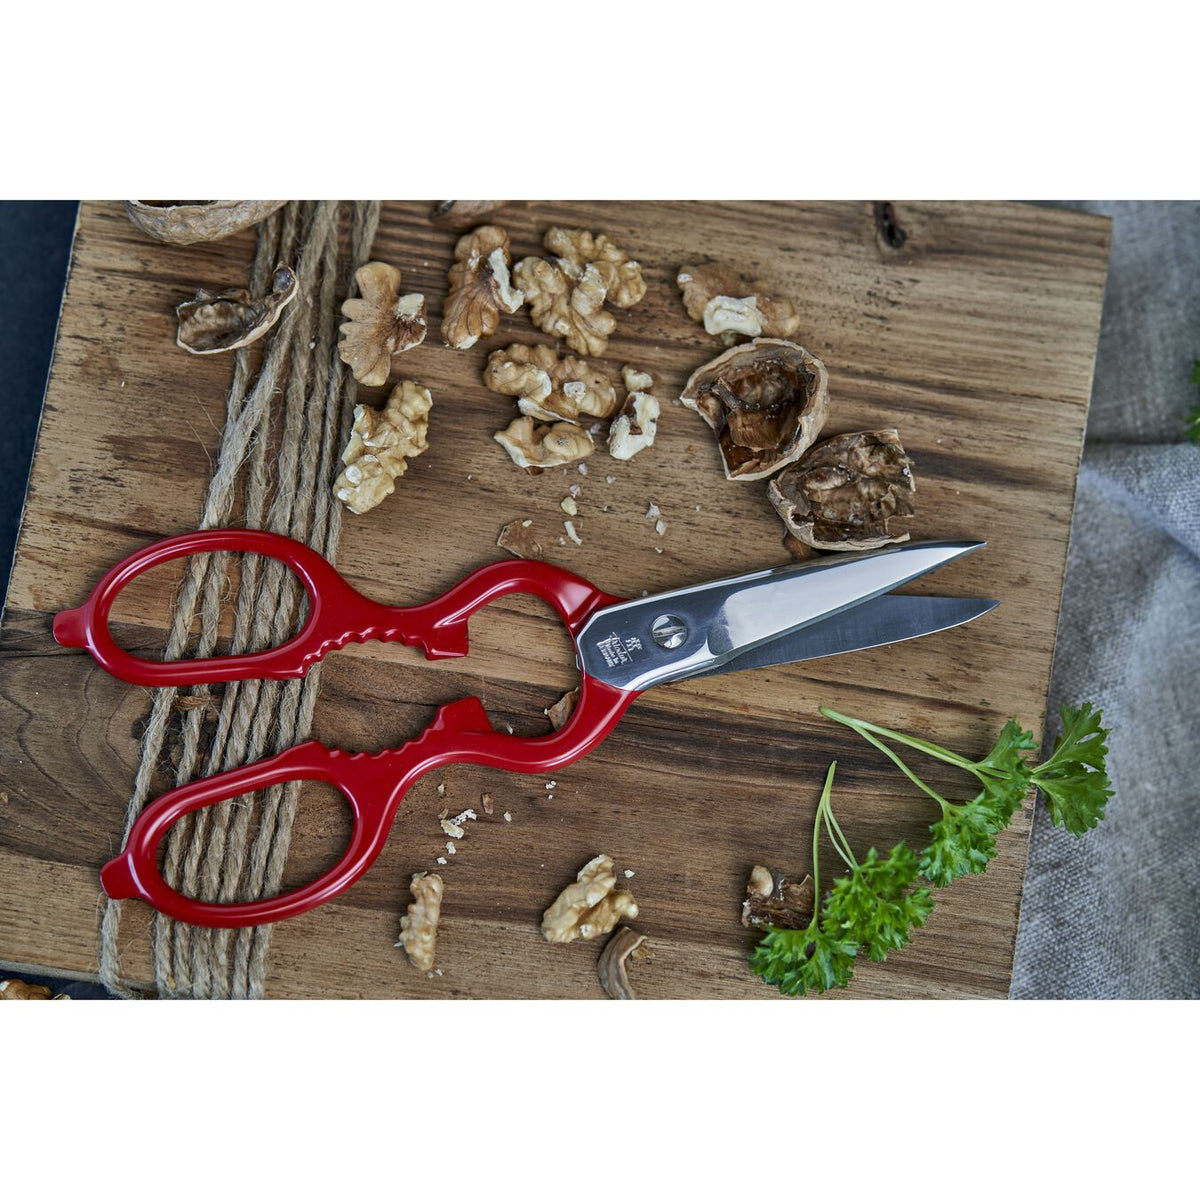 https://www.tanager.shop/wp-content/uploads/1691/20/every-client-is-treated-like-family-finding-the-zwilling-shears-scissors-multi-purpose-kitchen-shears-red-tanager-housewares-to-meet-the-needs-of-people-is-our-passion_1.jpg